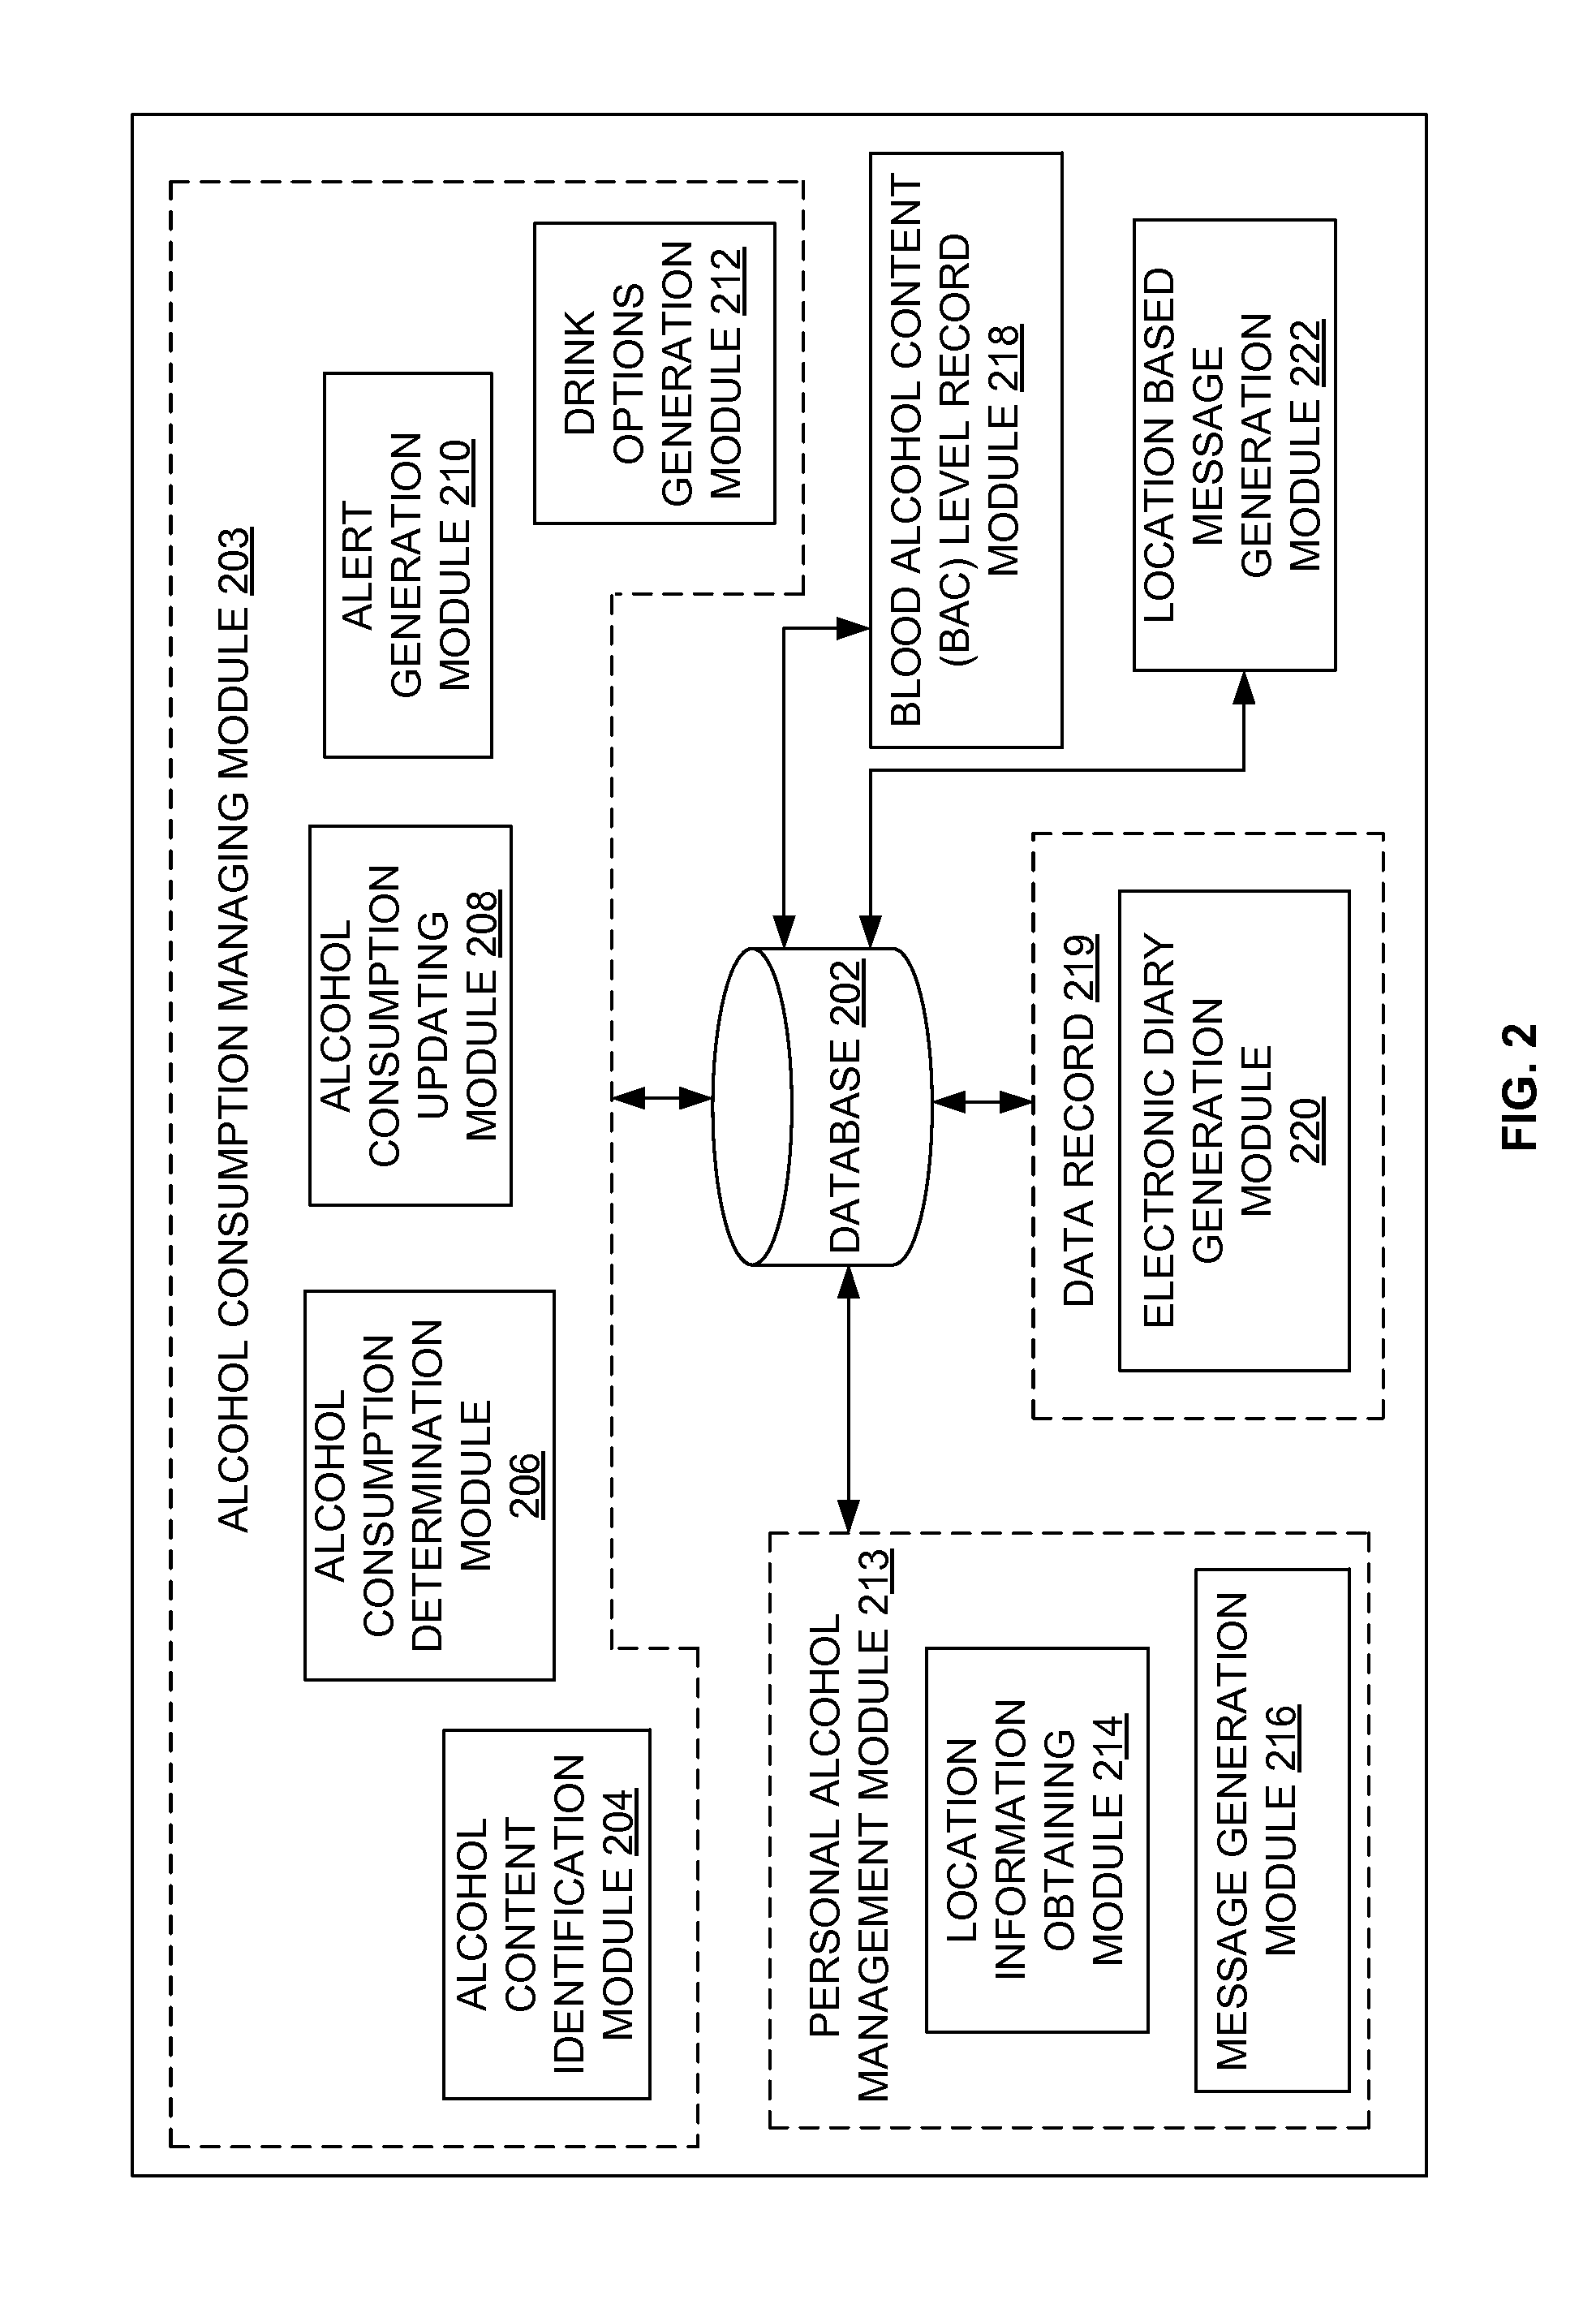 System and method for managing alcohol consumption of a user using a smartphone application